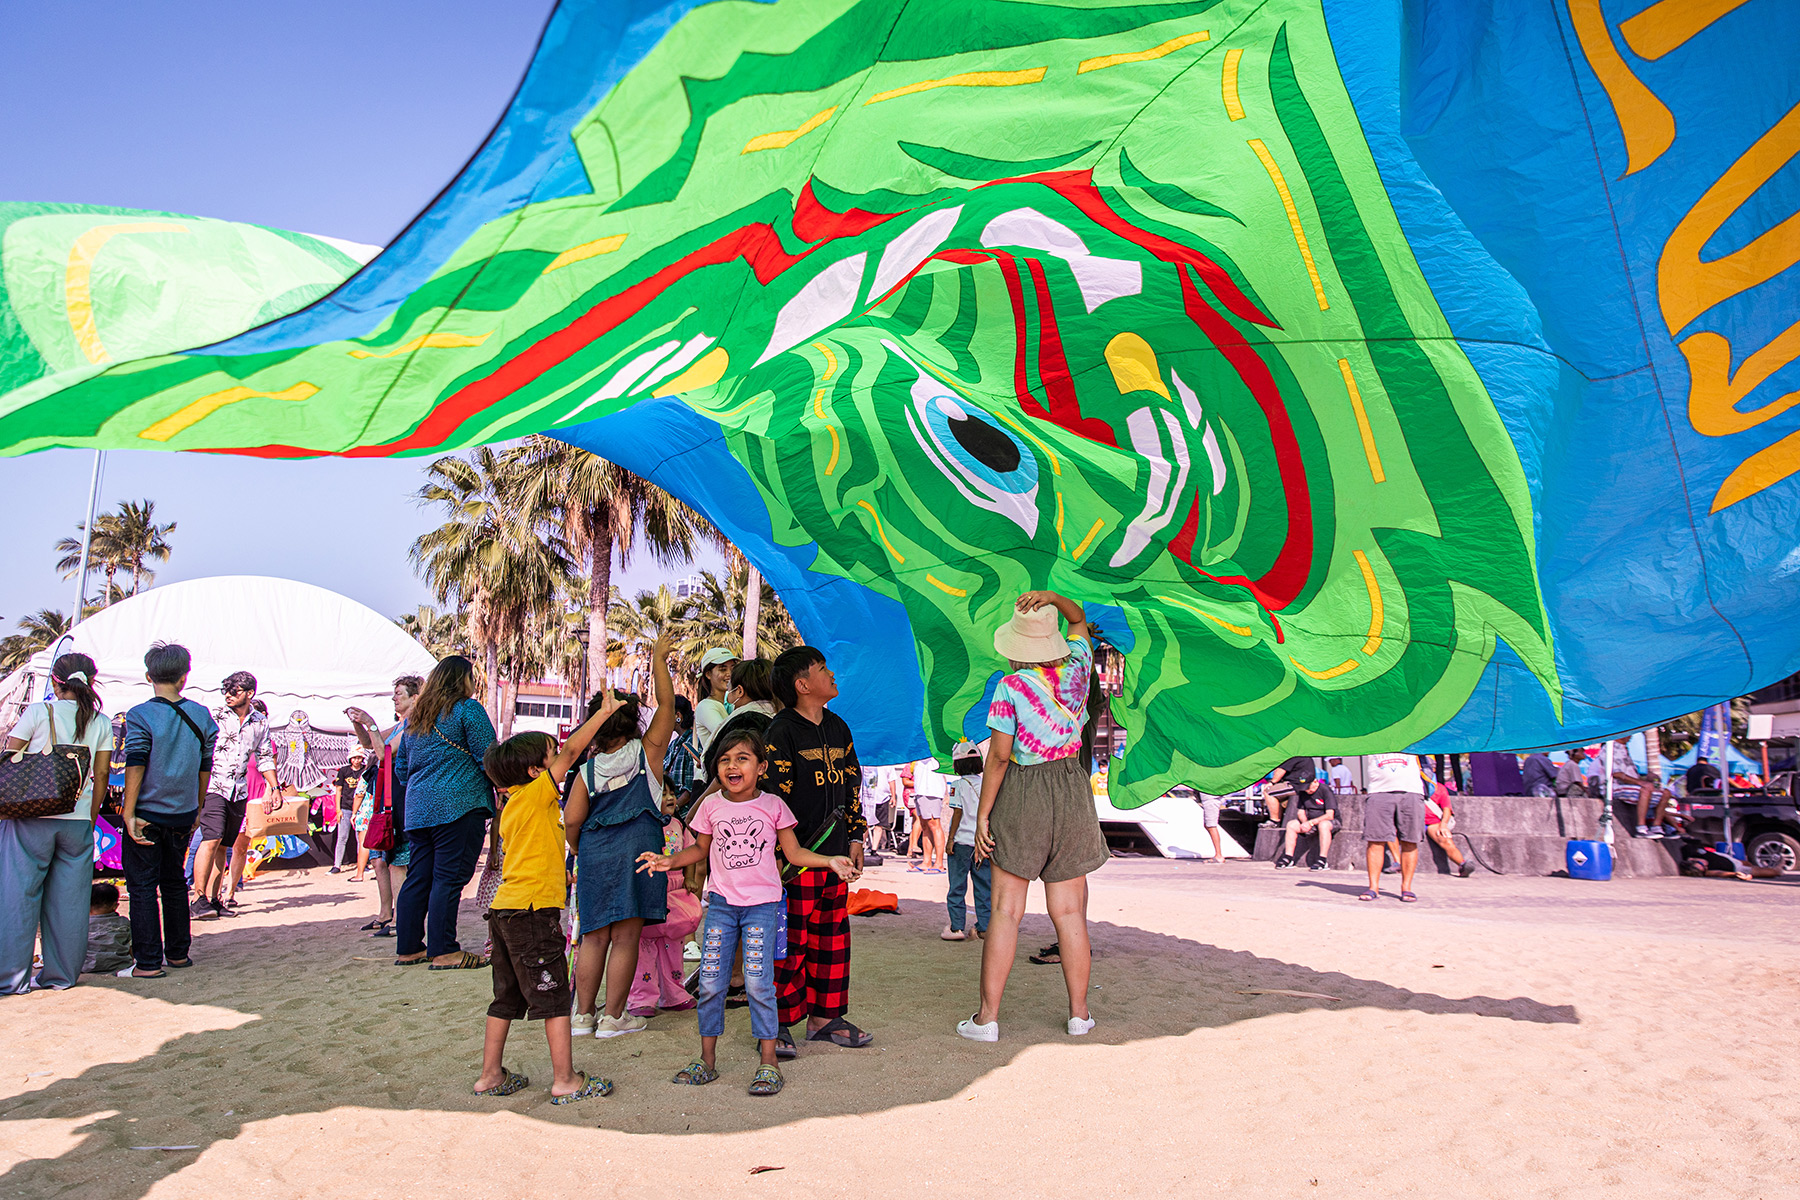 Children play under a large green kite on a sunny day